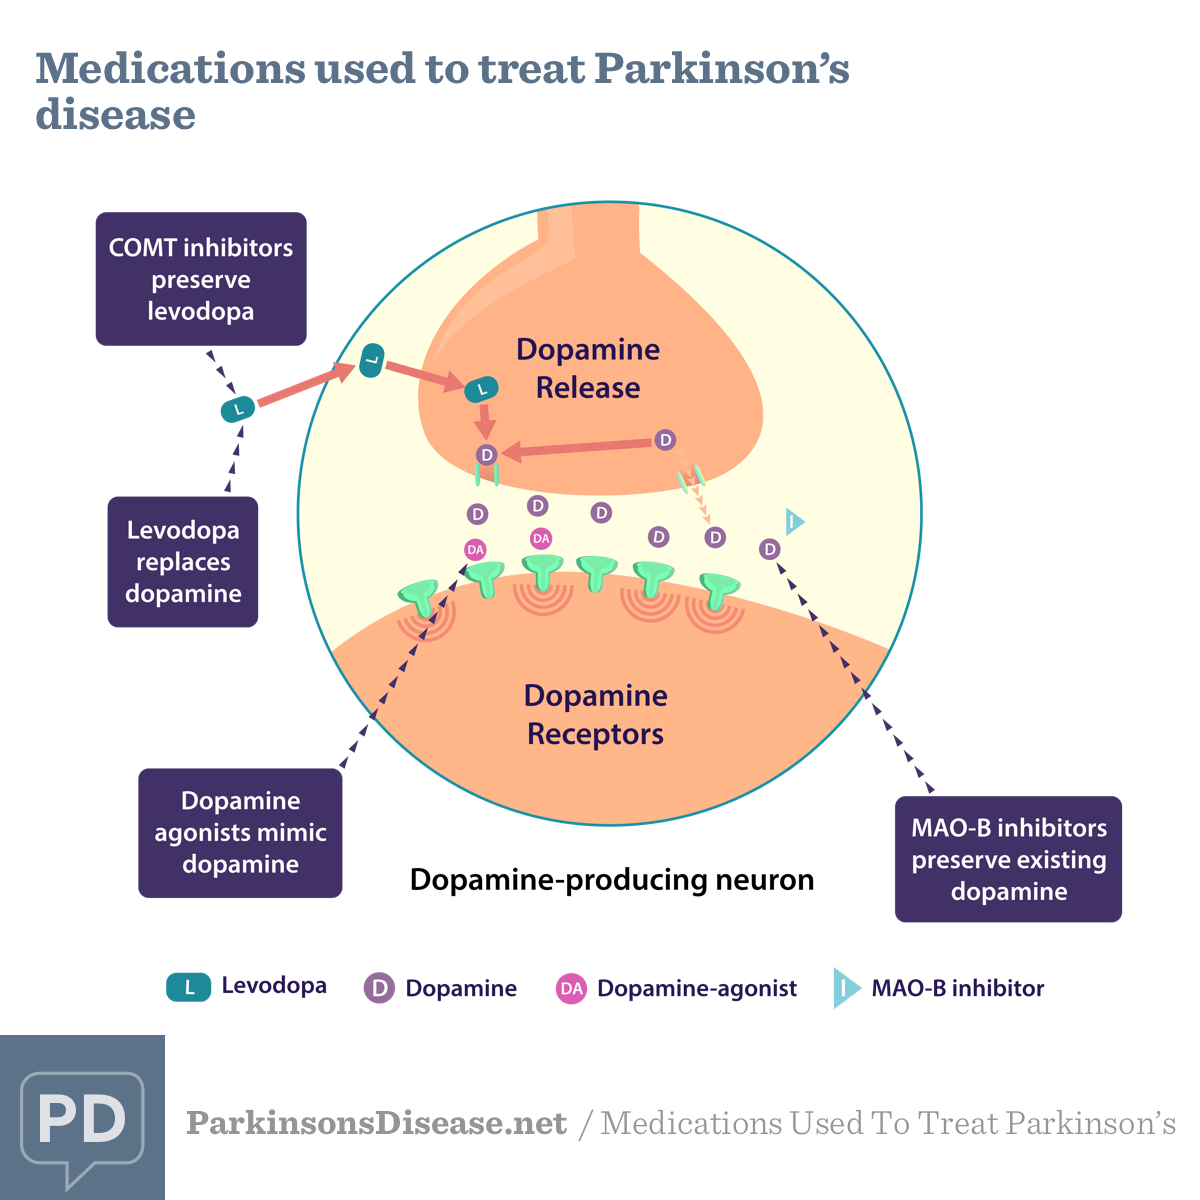 Diagram showing how medications to treat Parkinson's, including levadopa, dopamine agonists, COMT inhibitors, and MAO-B inhibitors, work in the body